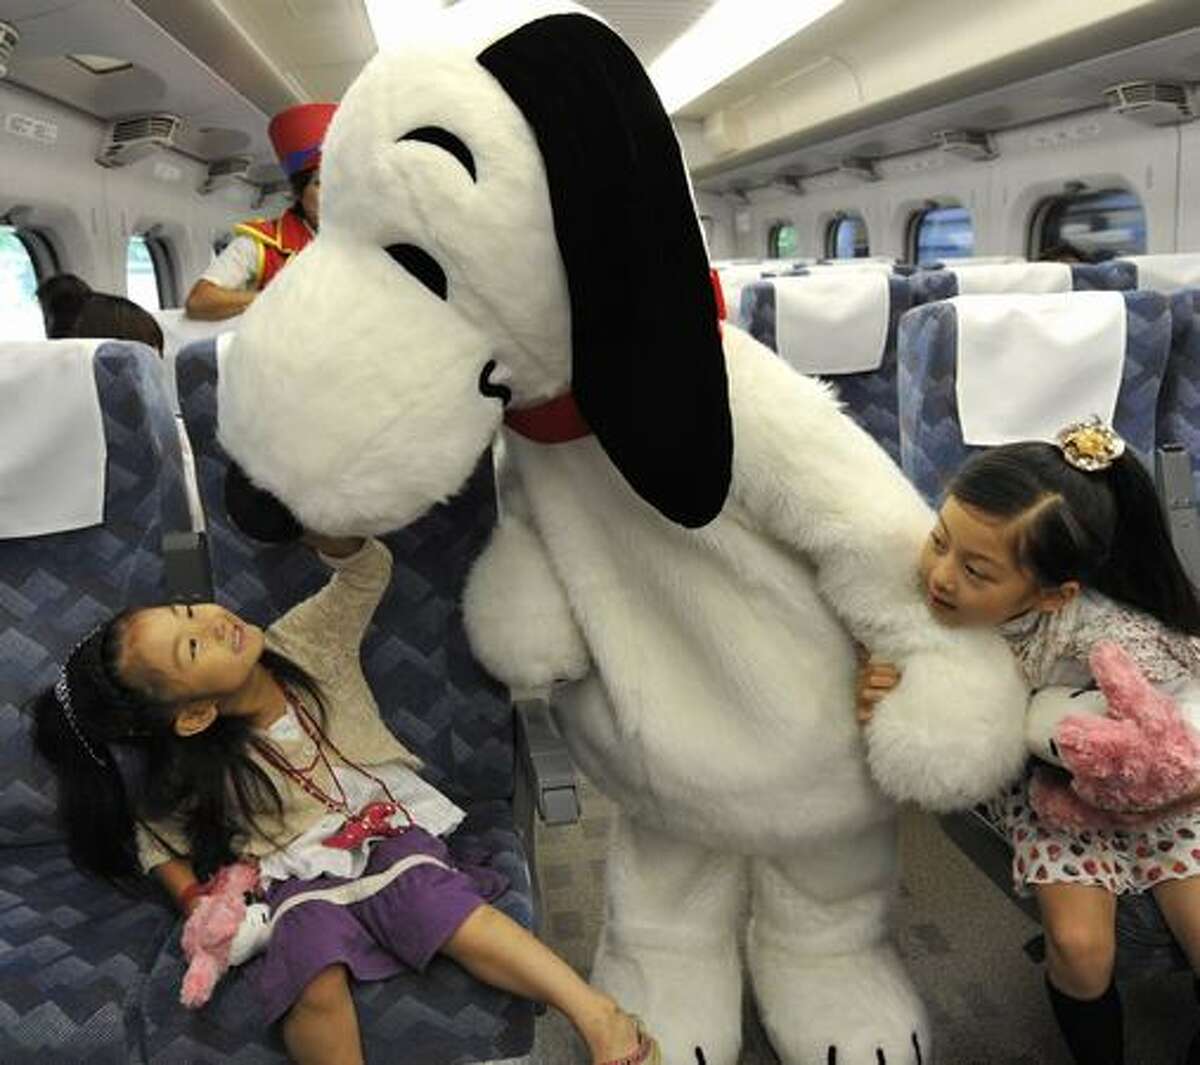 Cartoon character Snoopy greets children in the Shinkansen bullet train heading to Osaka from Tokyo for the promotion of Osaka based Hollywood theme park Universal Studios Japan on July 26, 2009.